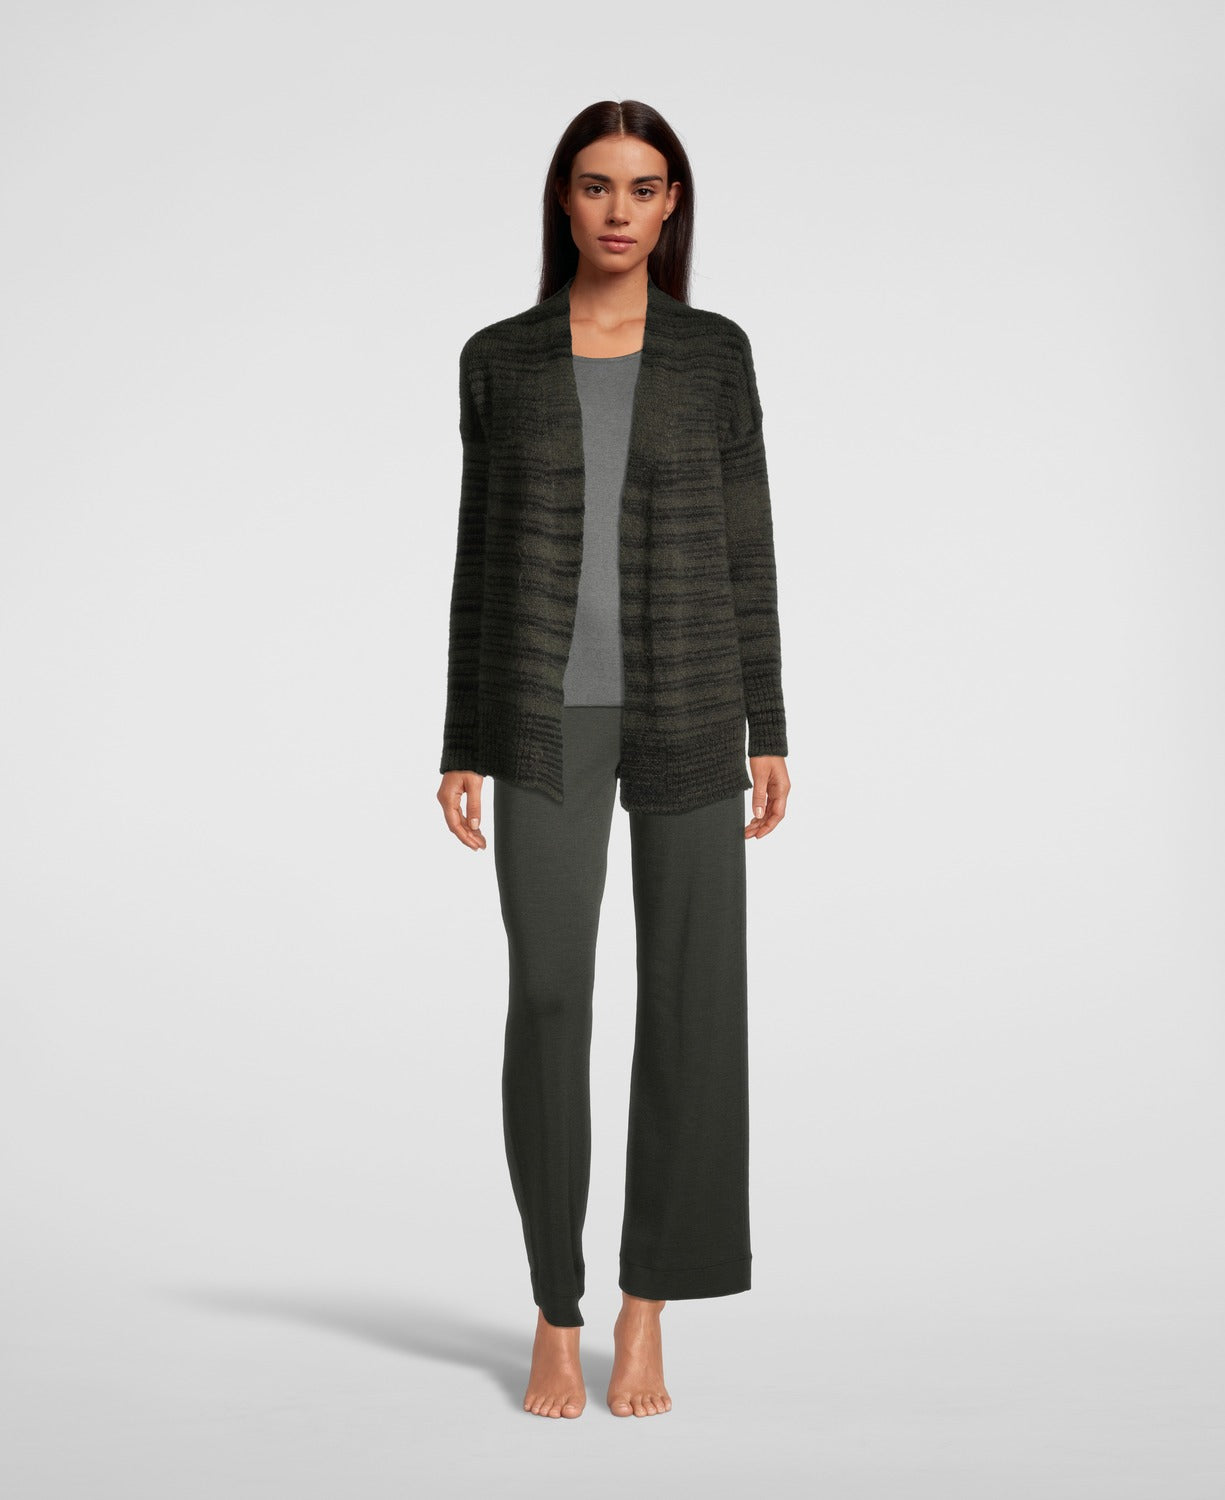 Woman Longsleeves open-front Cardigan 6712 - Oscalito